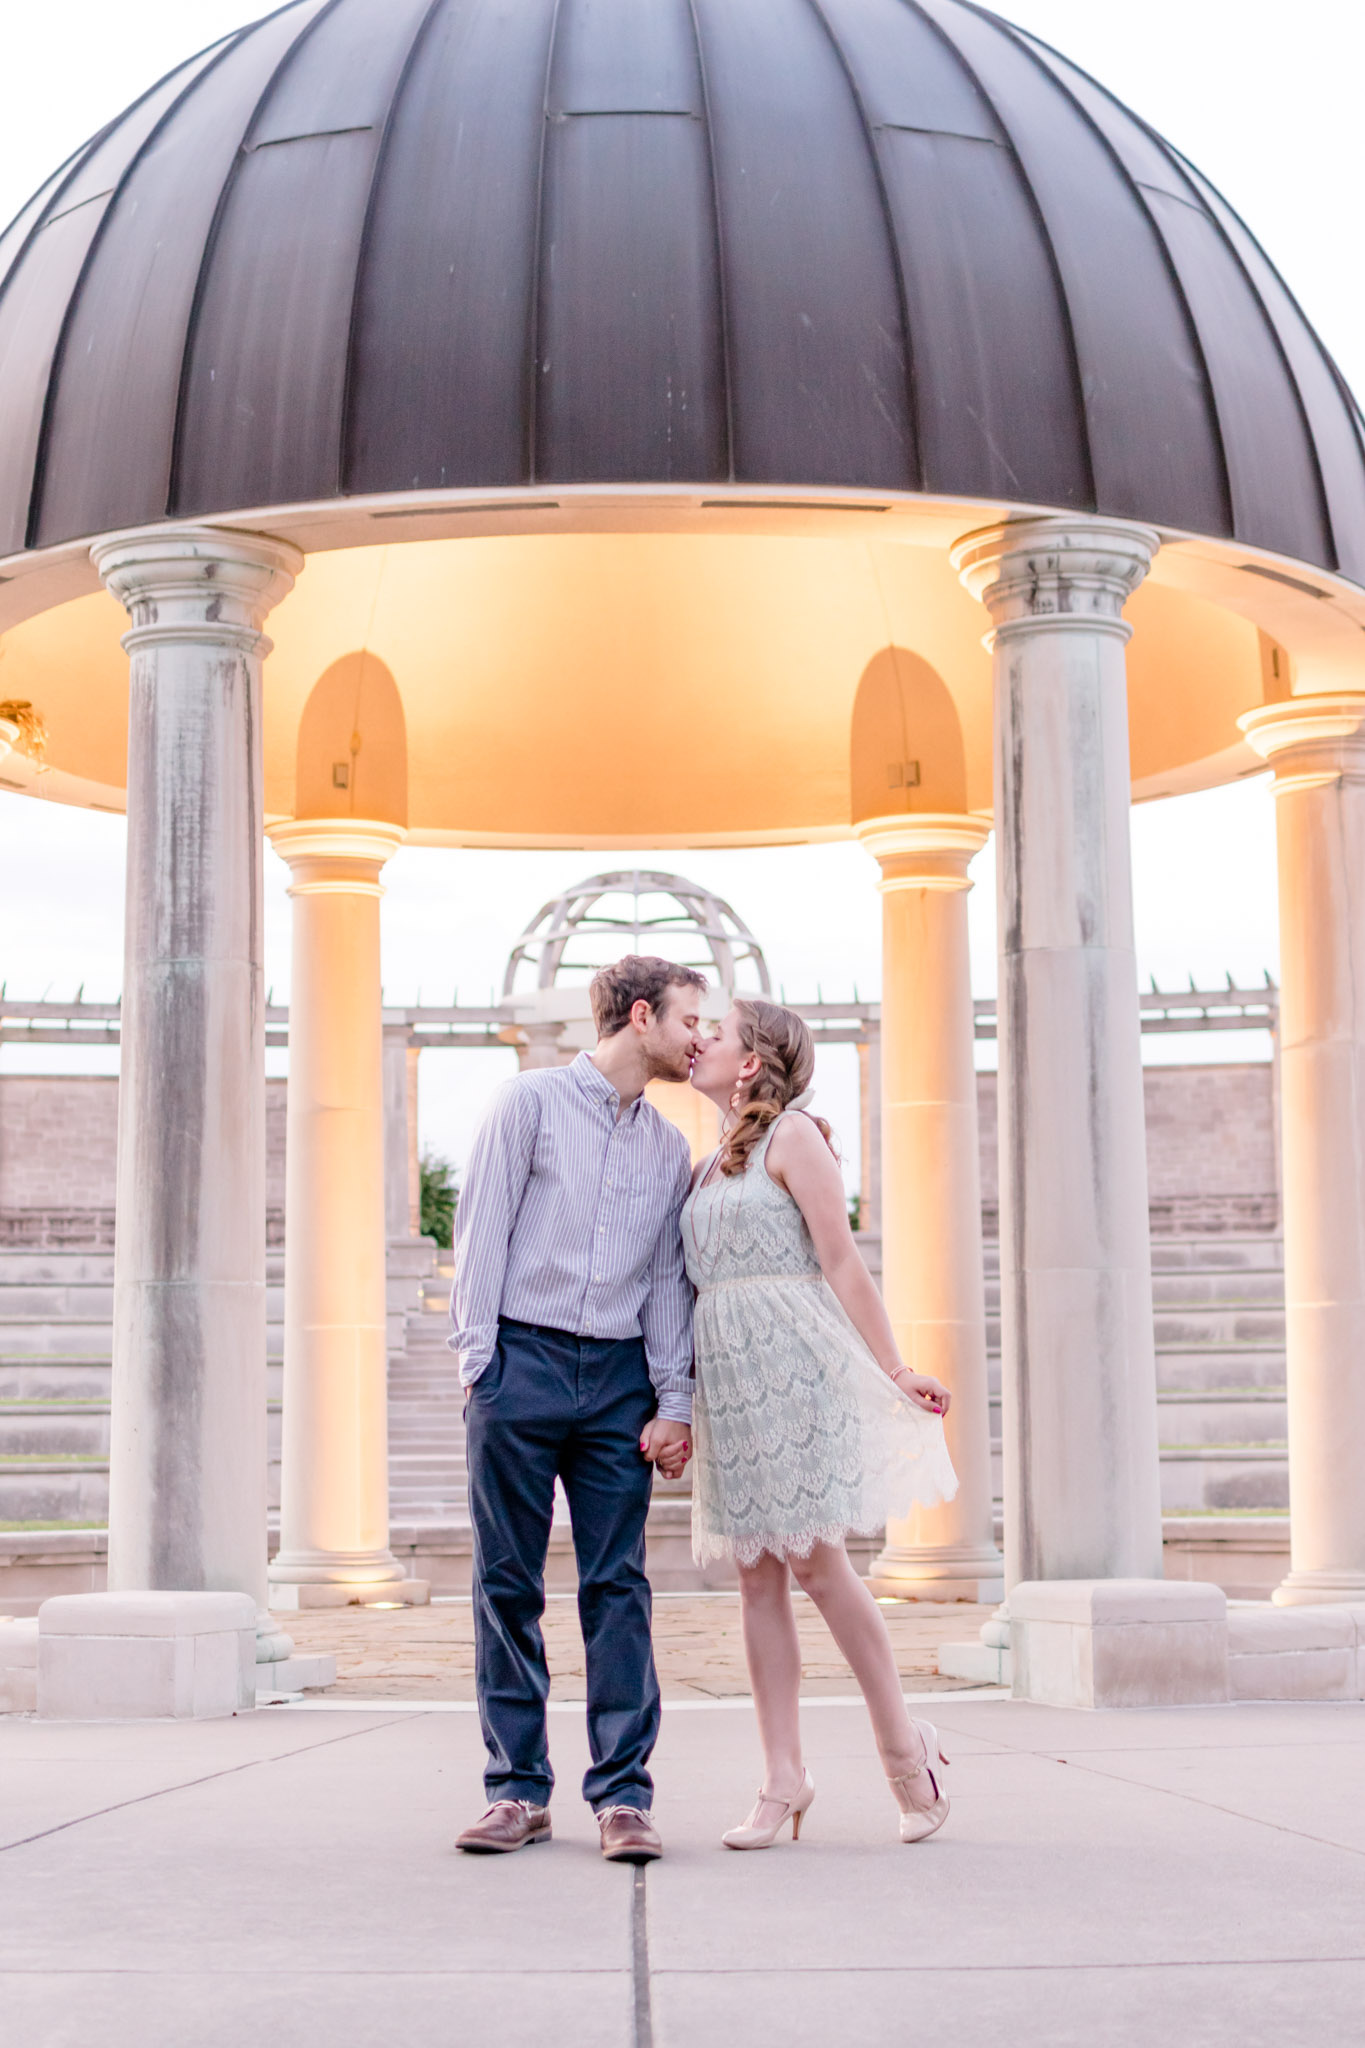 Couple kisses at amphitheater at Coxhall Gardens in Carmel, Indiana